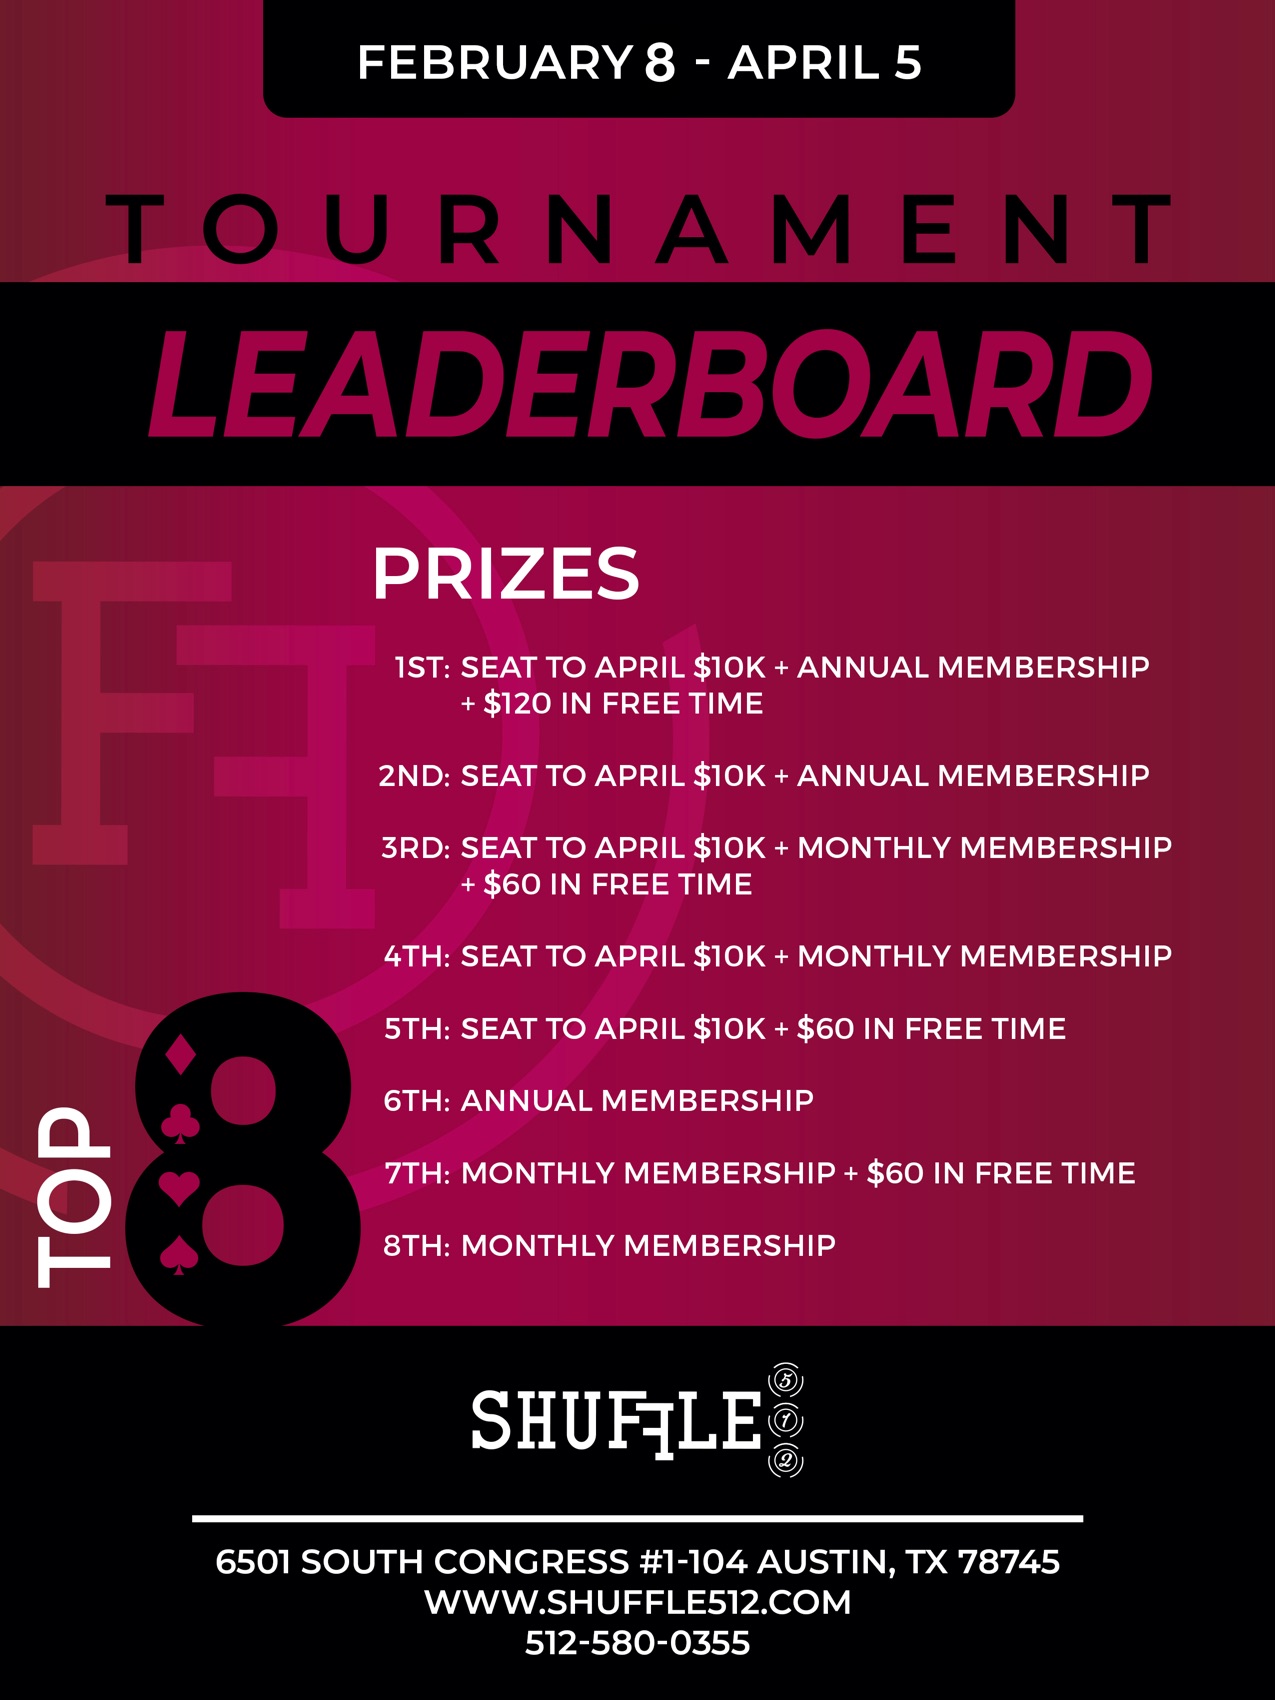 Shuffle 512 Tournament Leaderboard spring 2023 flyer copy